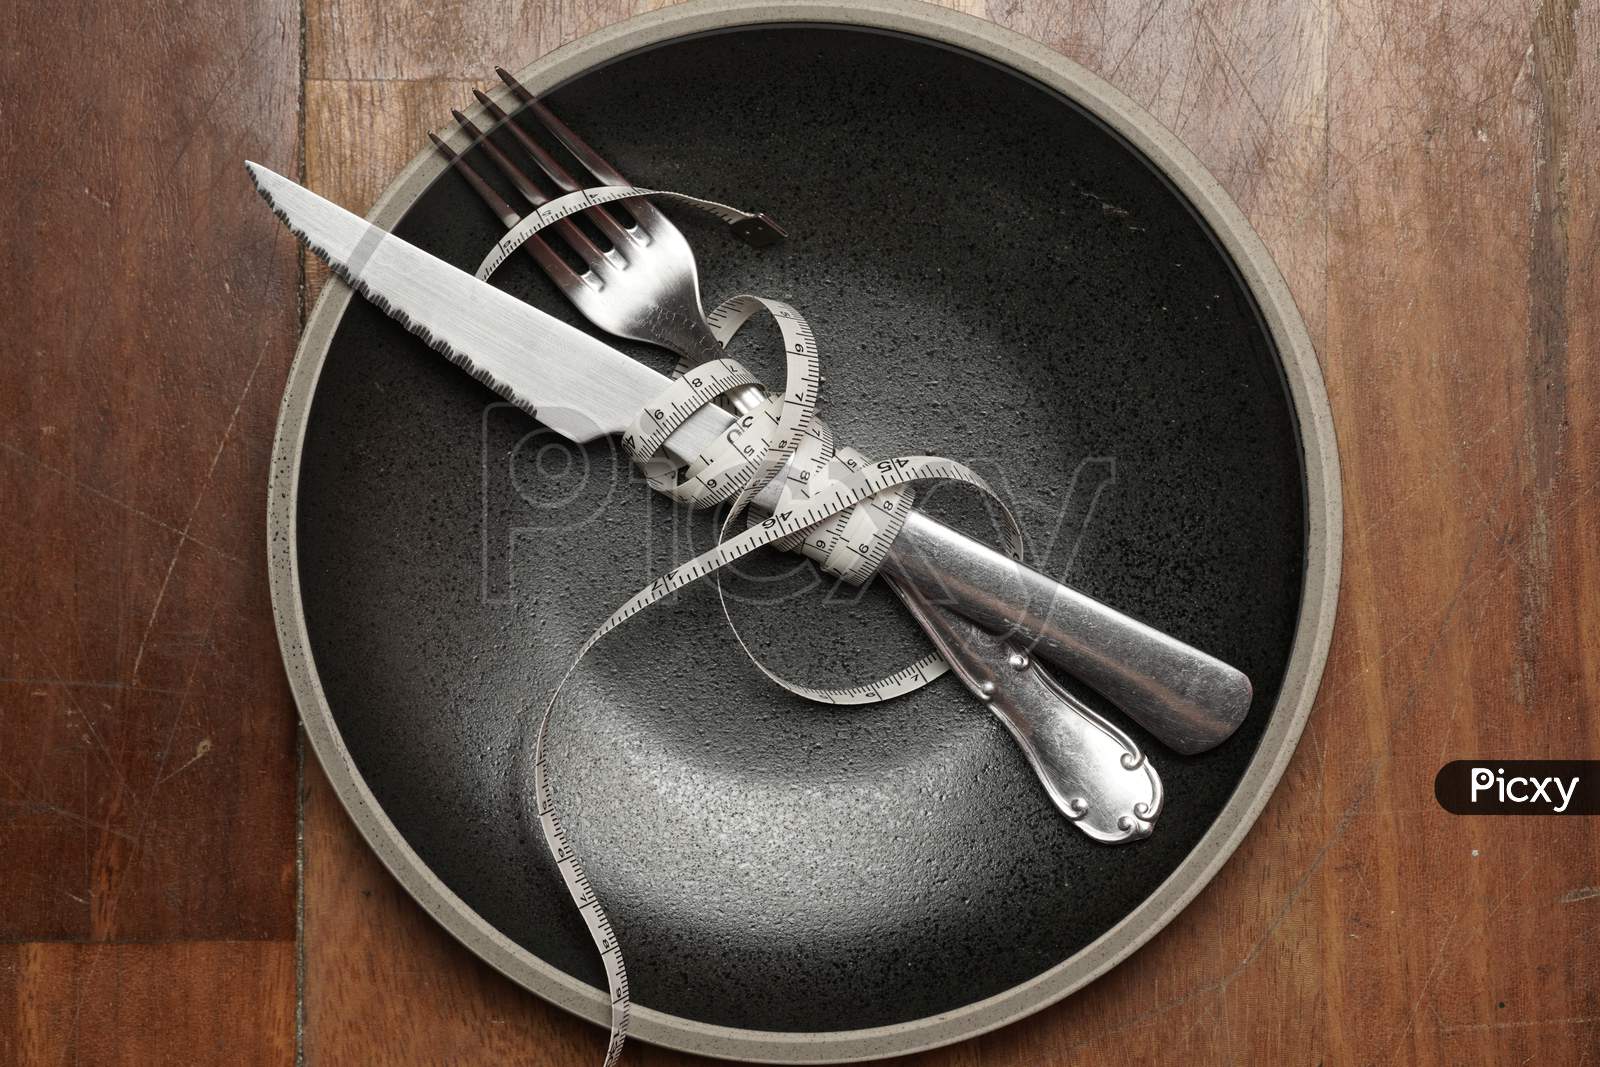 Empty Plate On Wooden Background With Cutlery And Measuring Tape. Diet Concept.